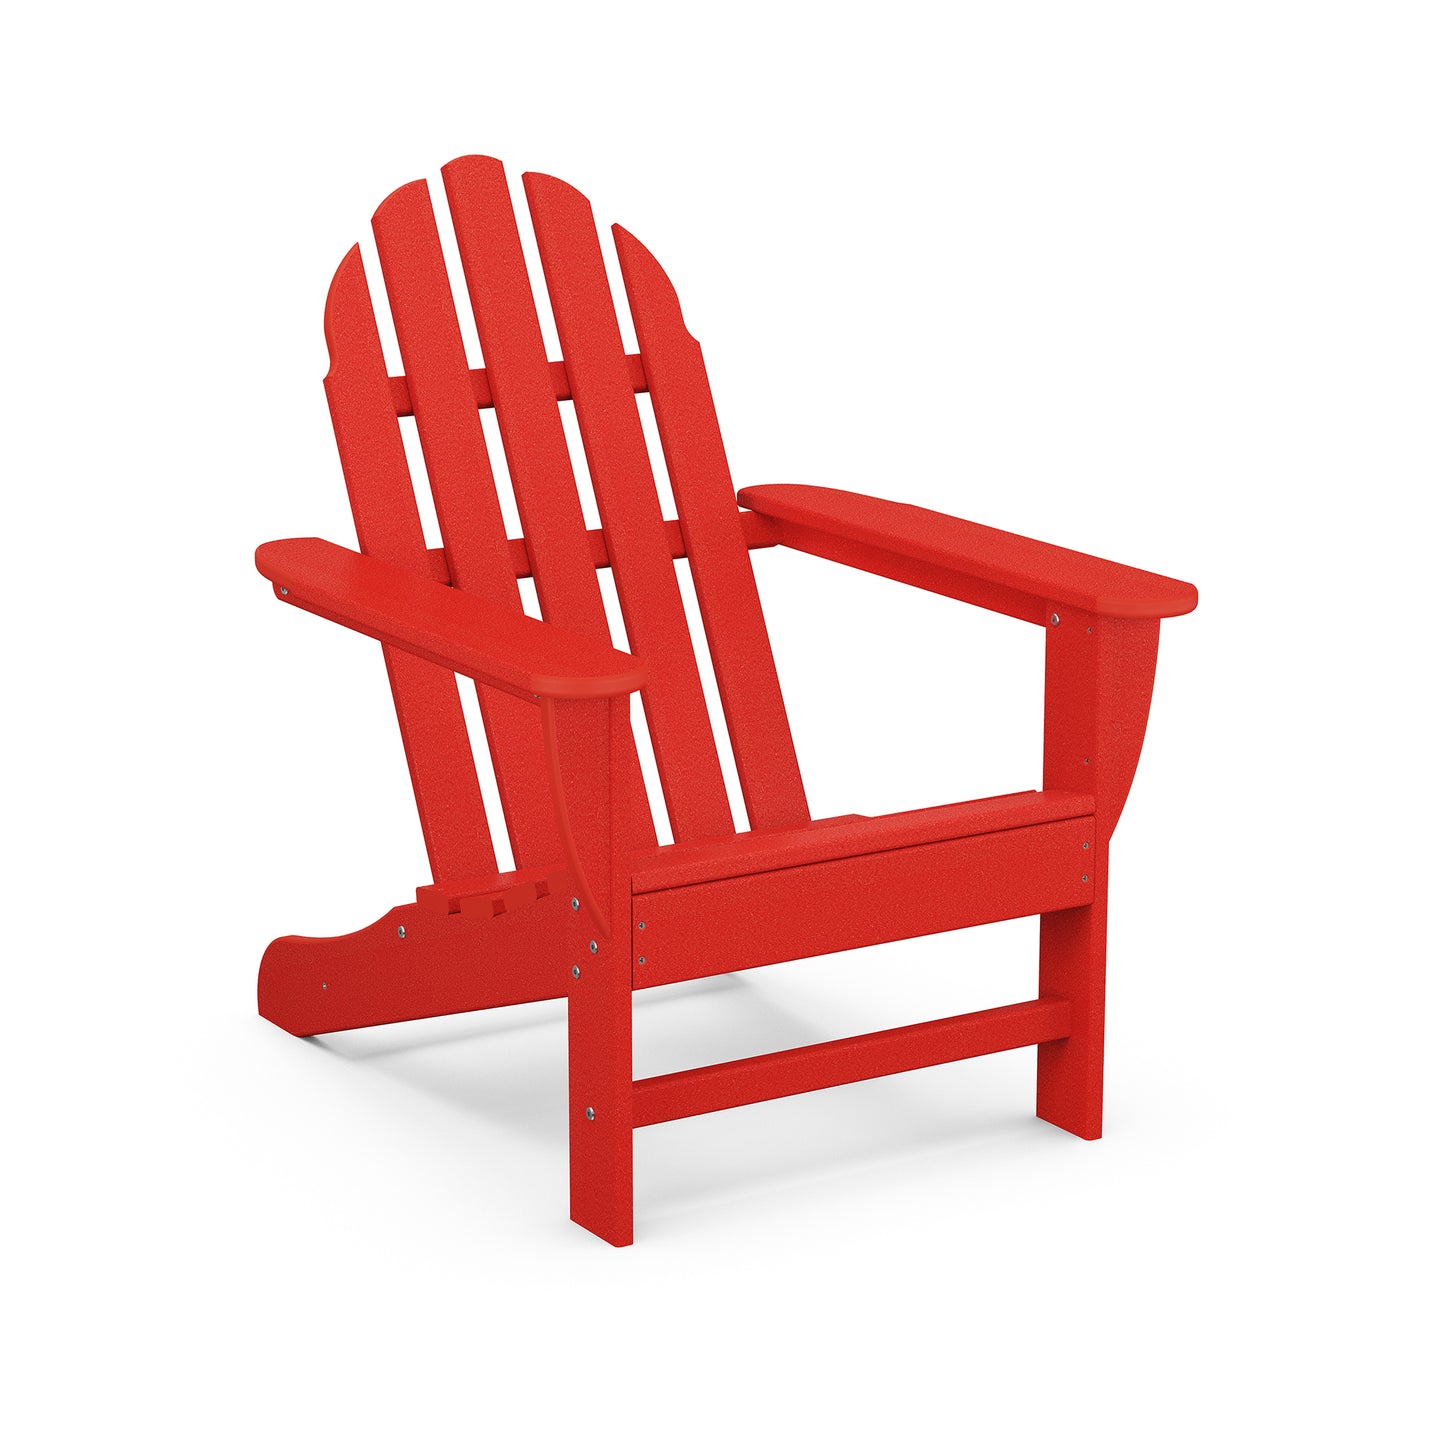 A vibrant red POLYWOOD Classic Adirondack Chair, featuring a slatted design with wide armrests, displayed against a white background.